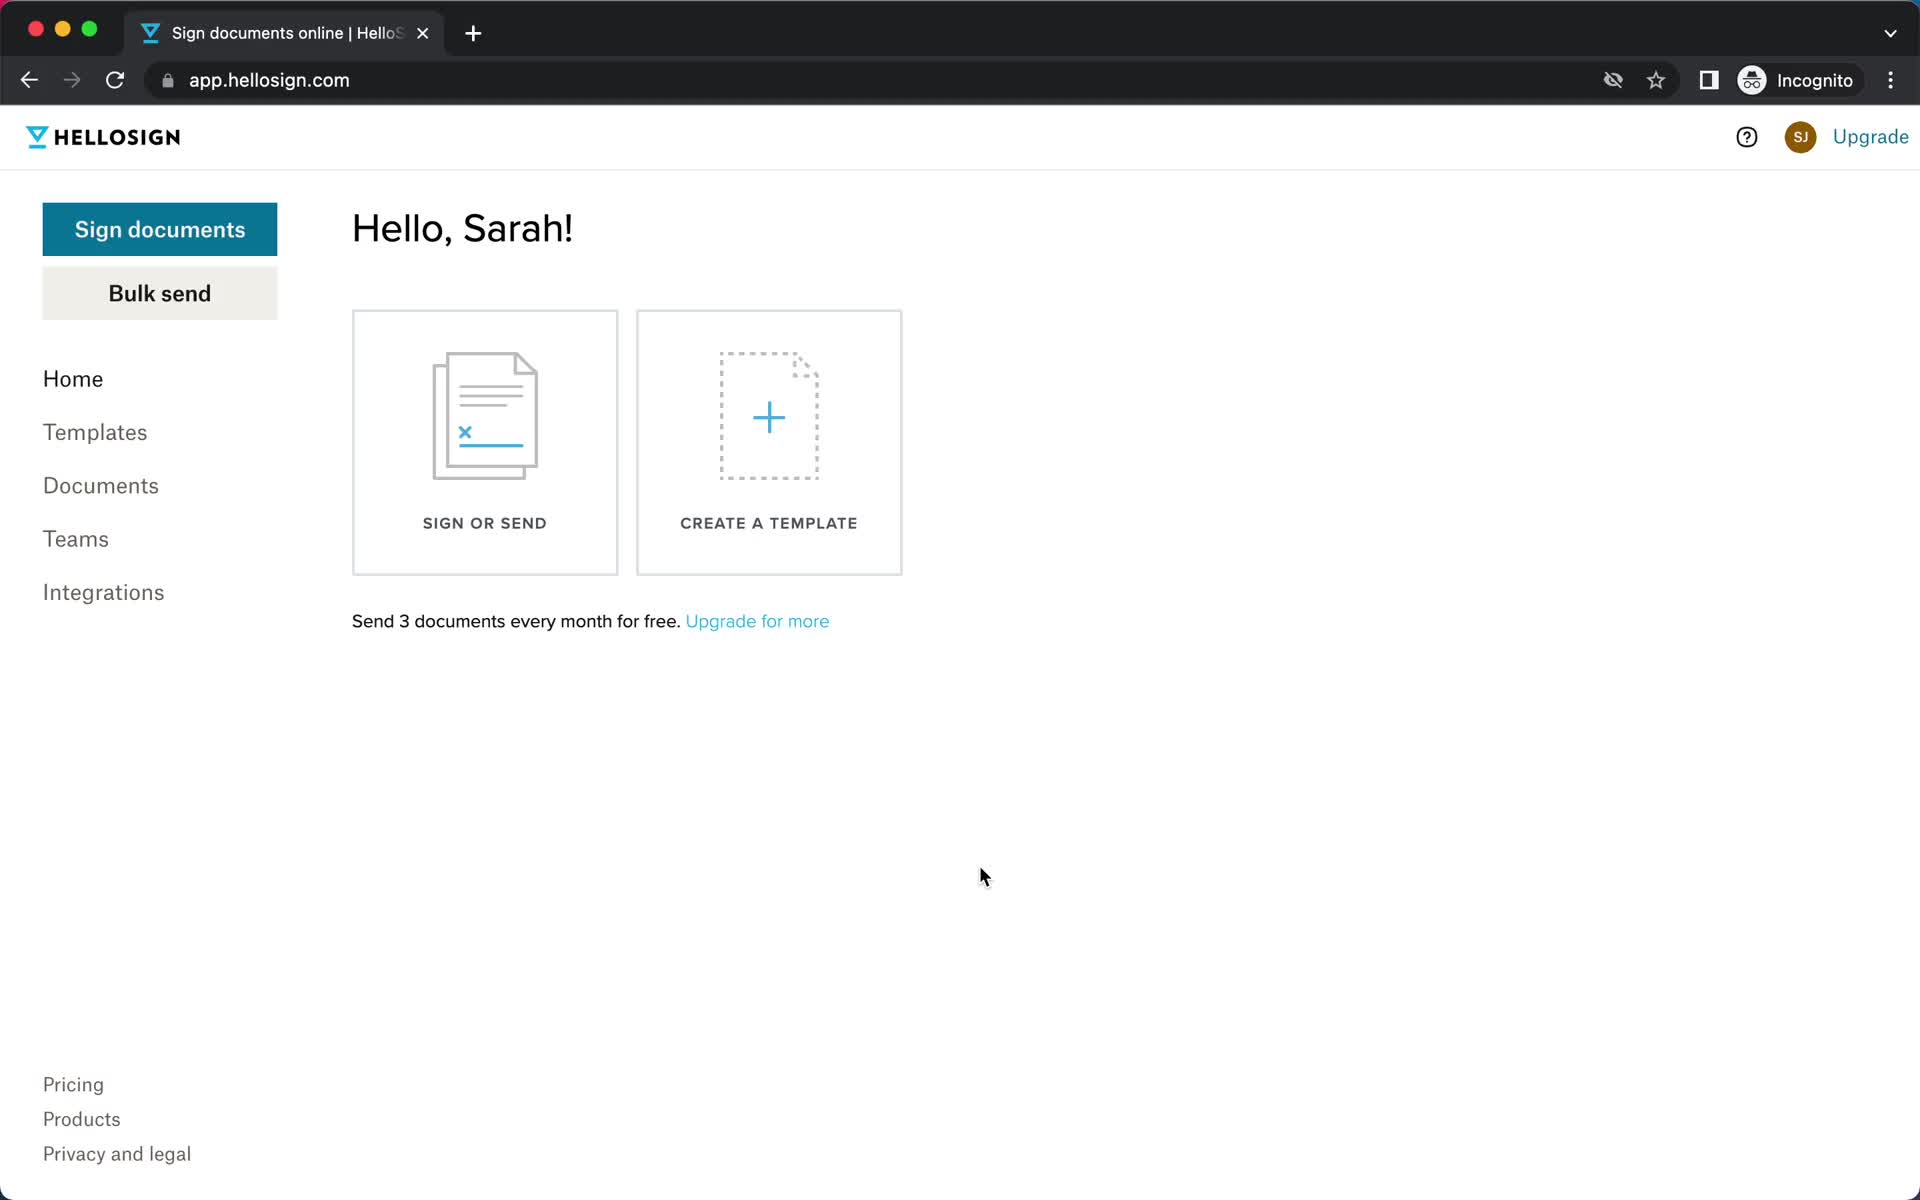 Screenshot of Home on Upgrading your account on HelloSign user flow